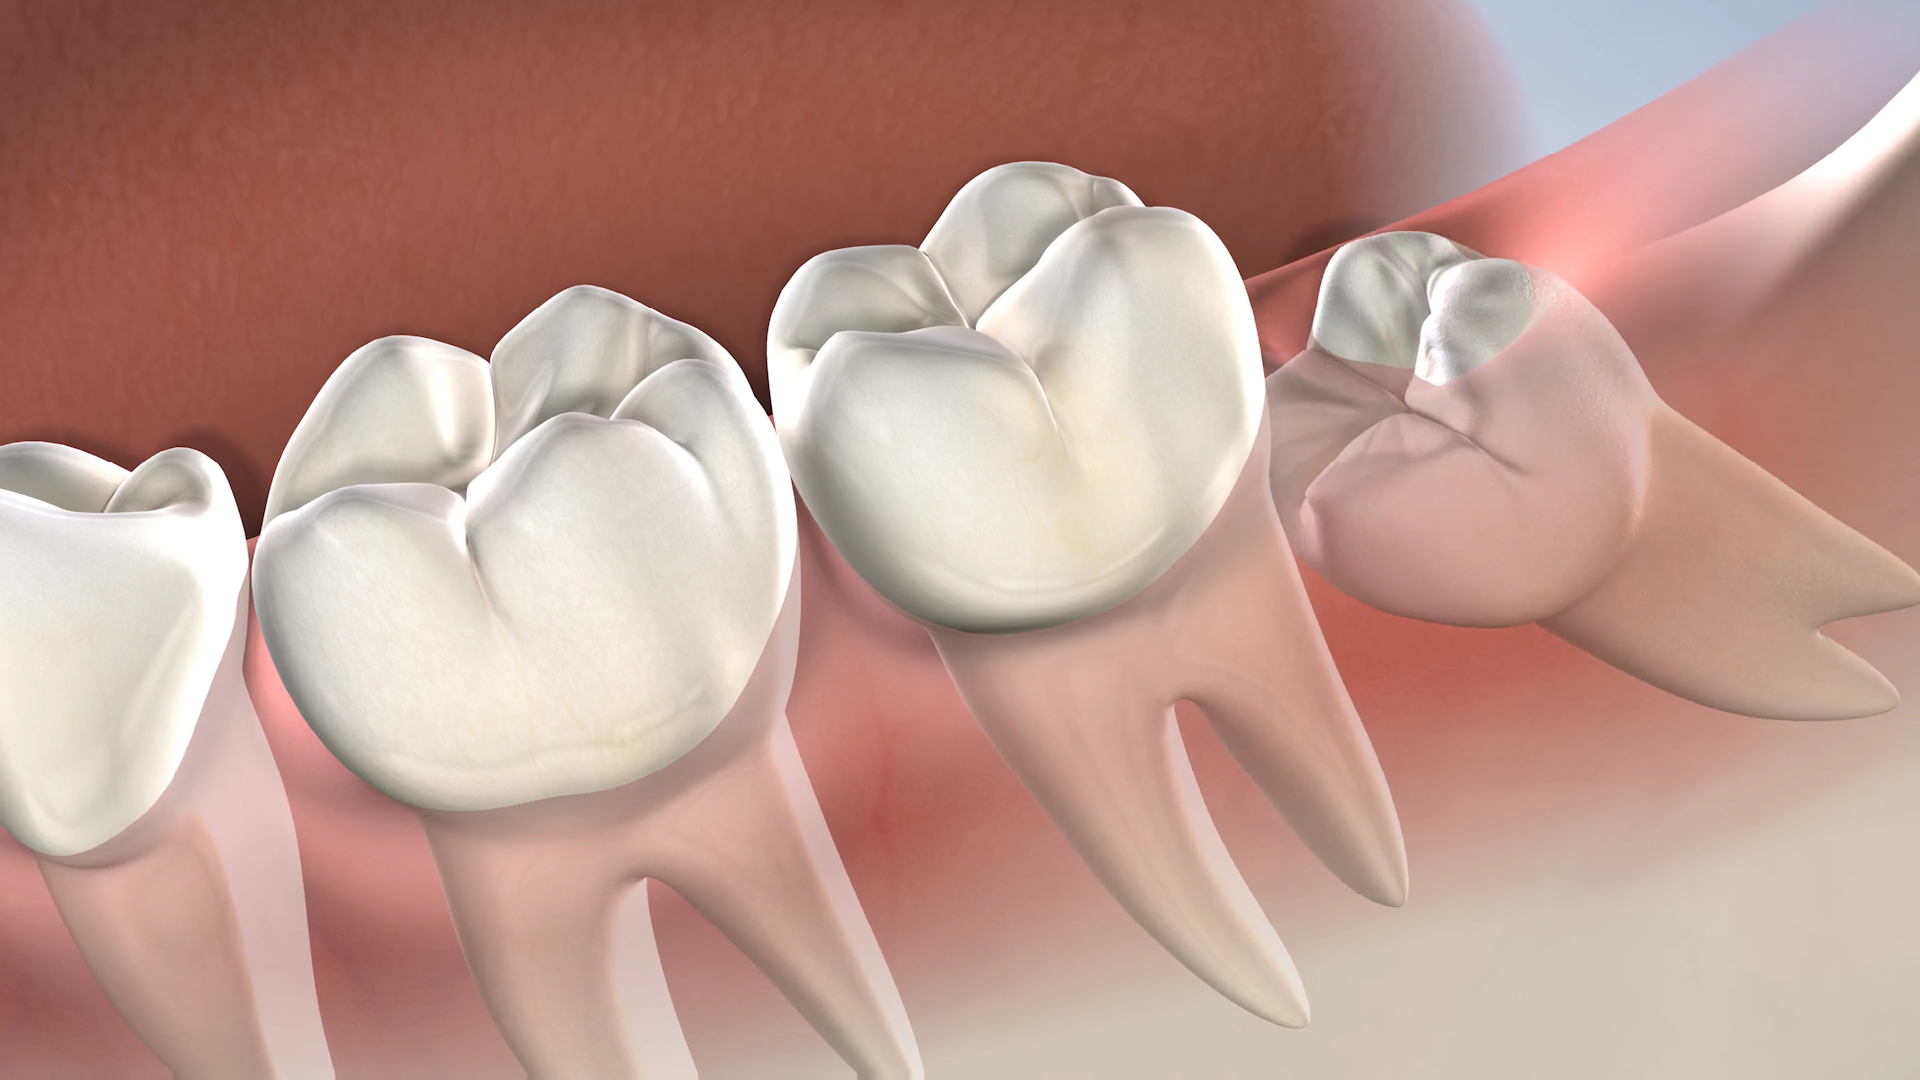 Illustration of an impacted wisdom tooth